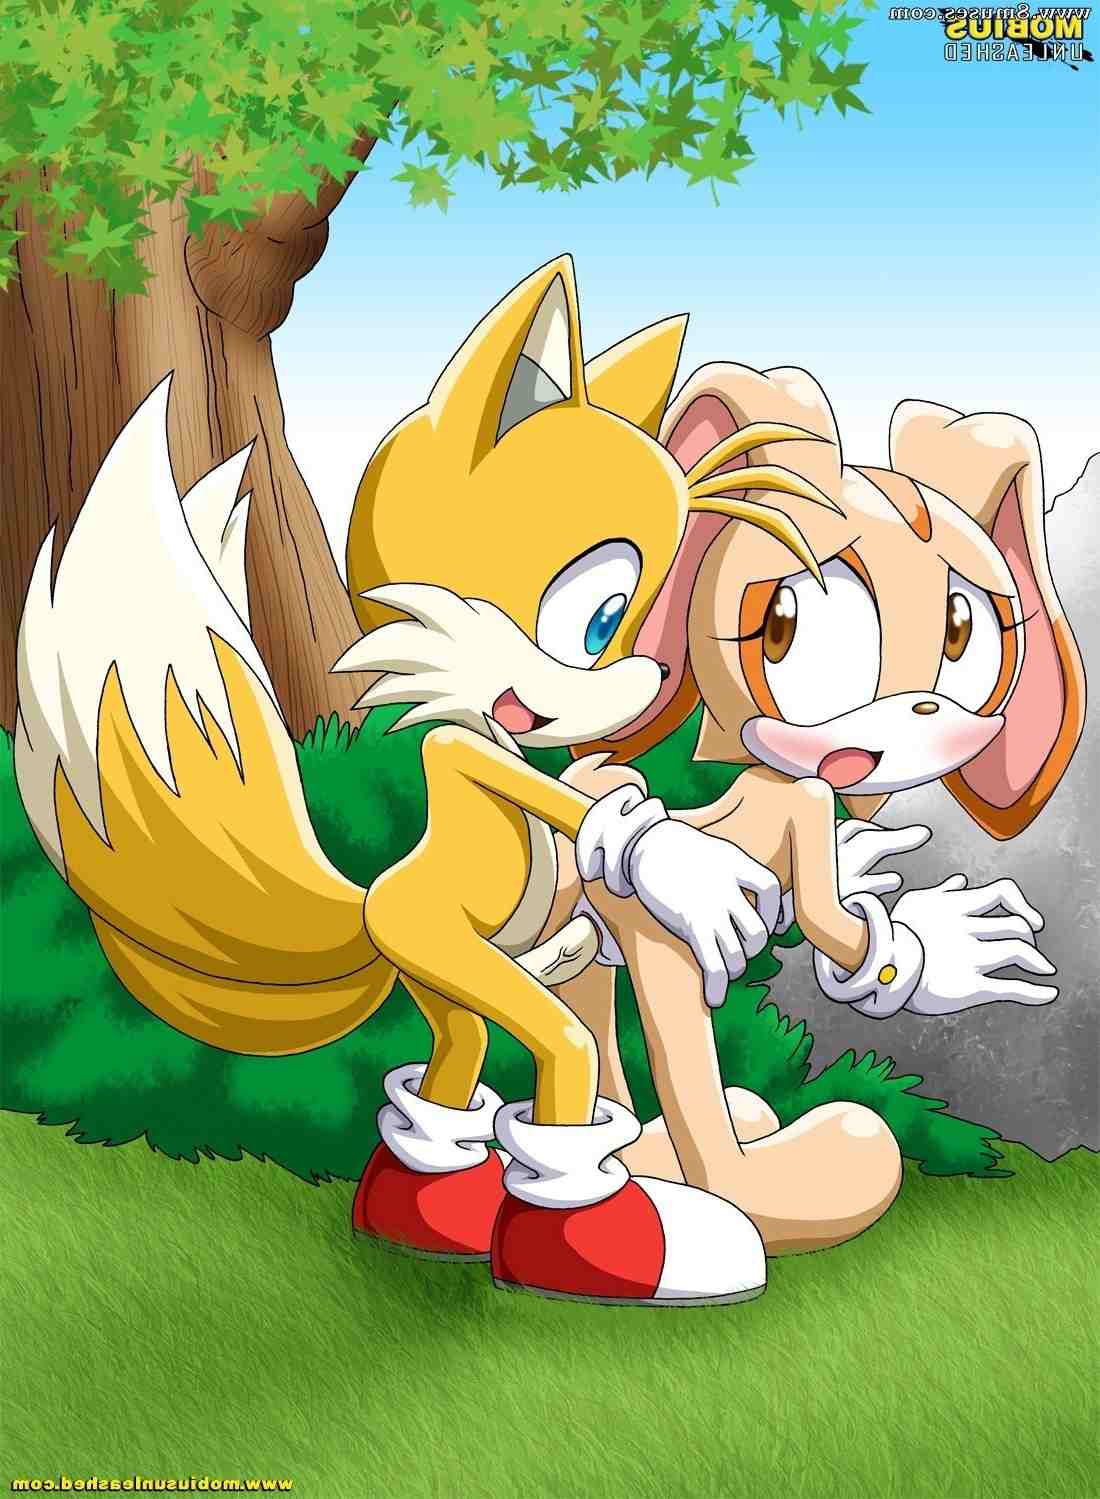 Amy Rose Creampied By Tails The Fox